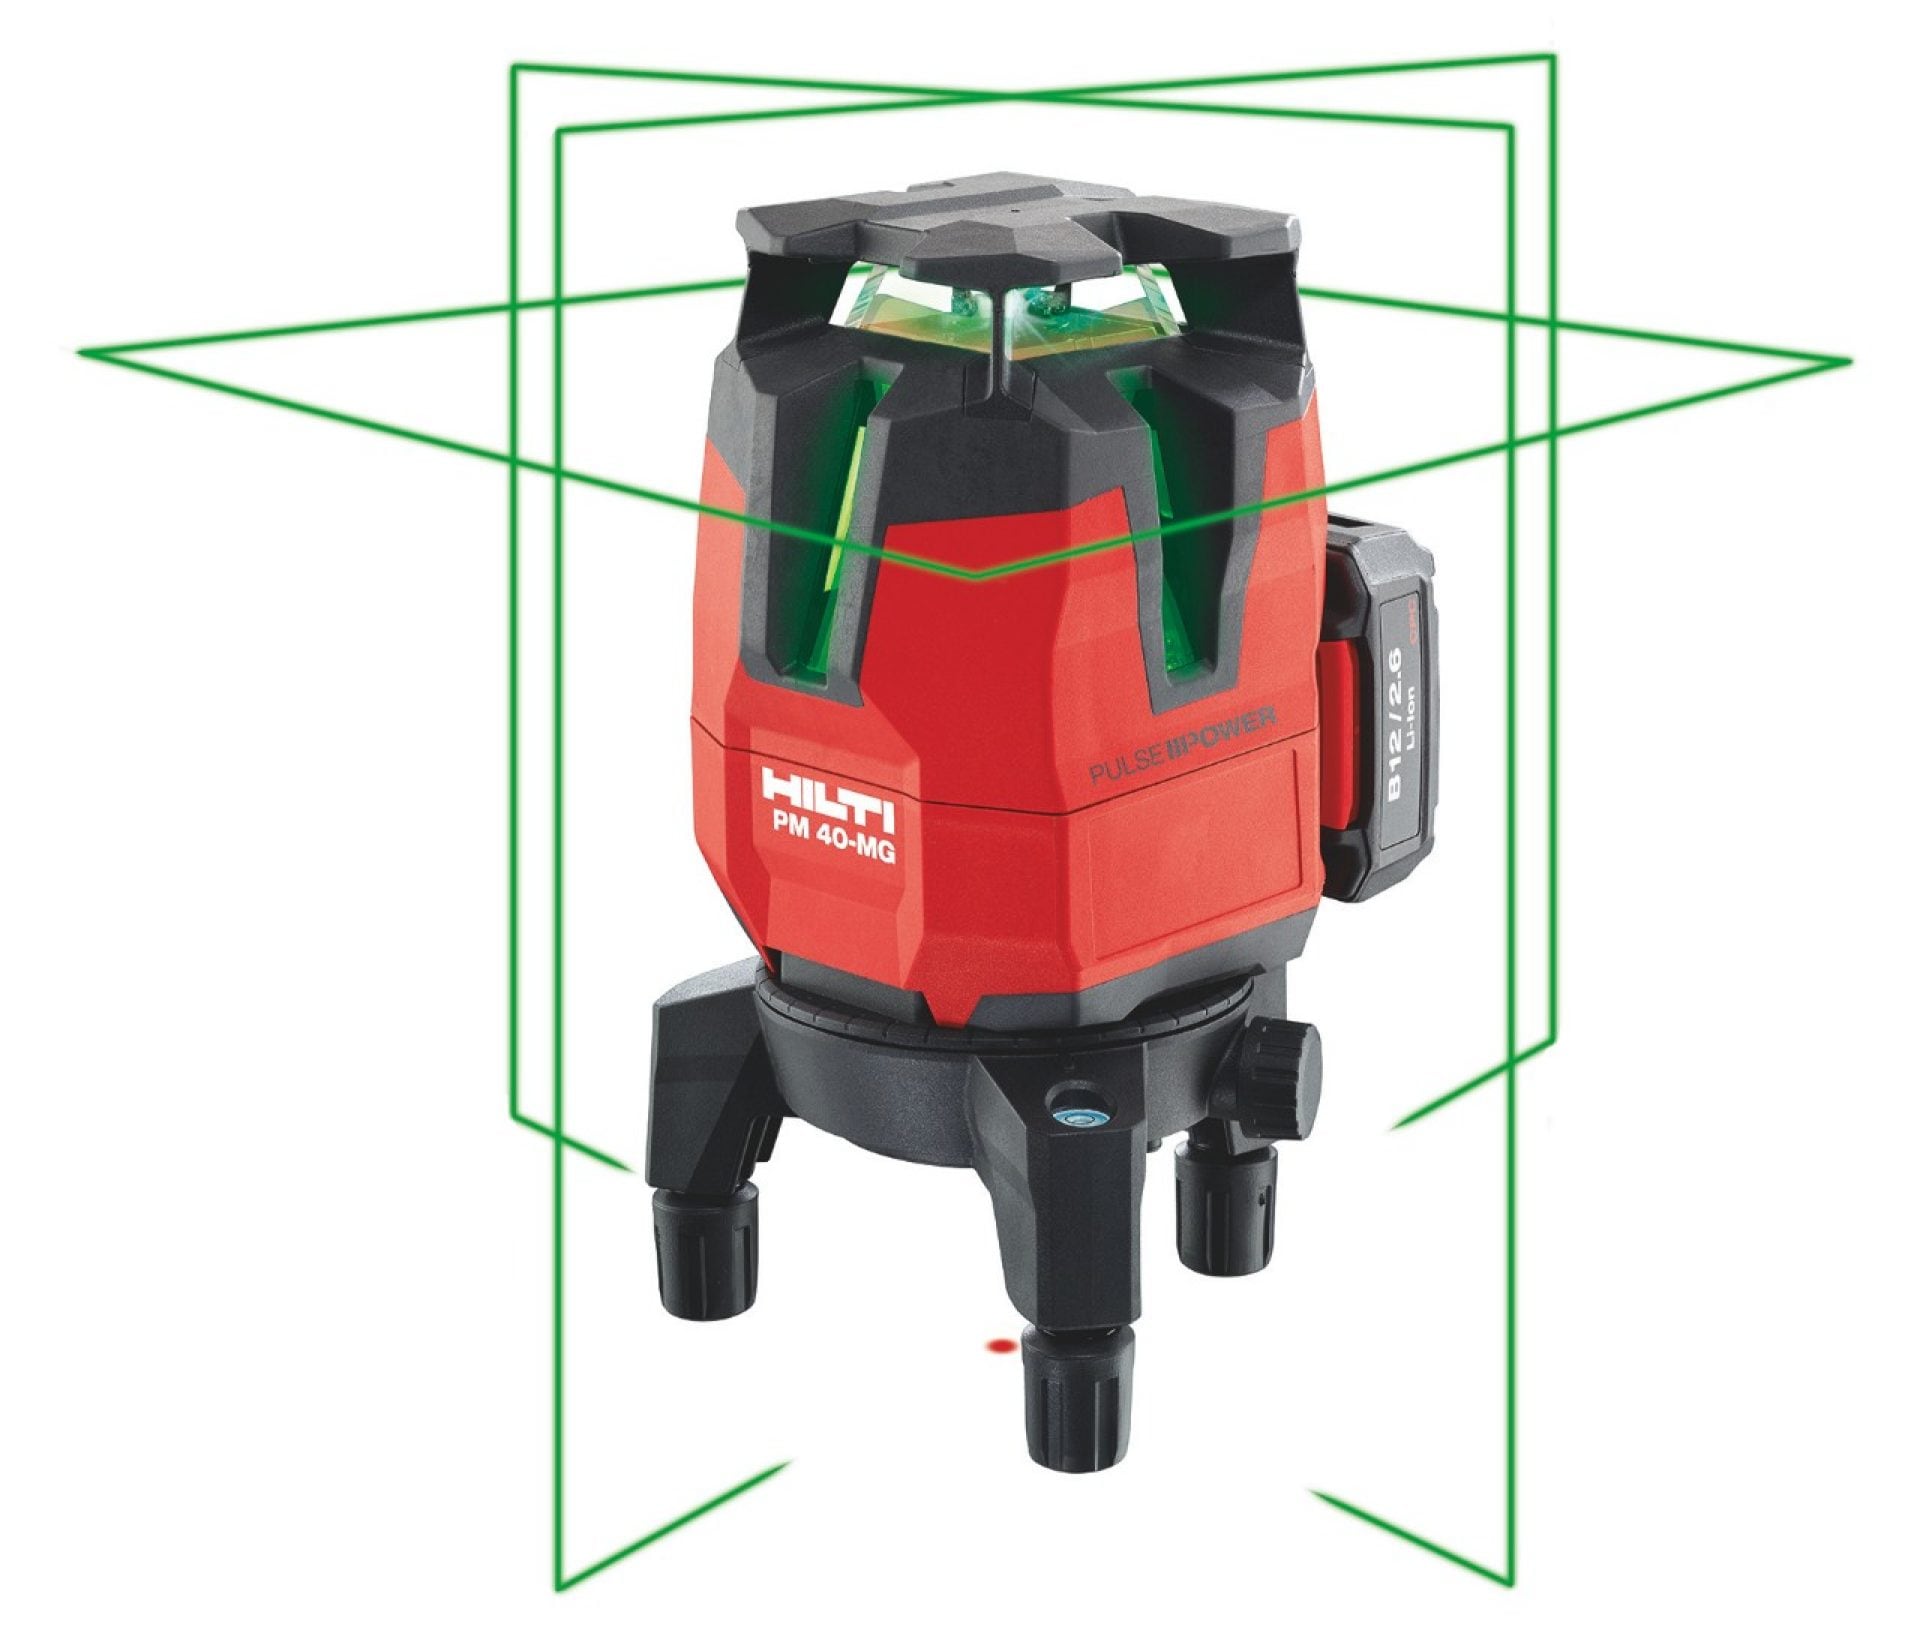 Hilti PM 40-MG green beam multi-line laser with four vertical lines and one 360° line